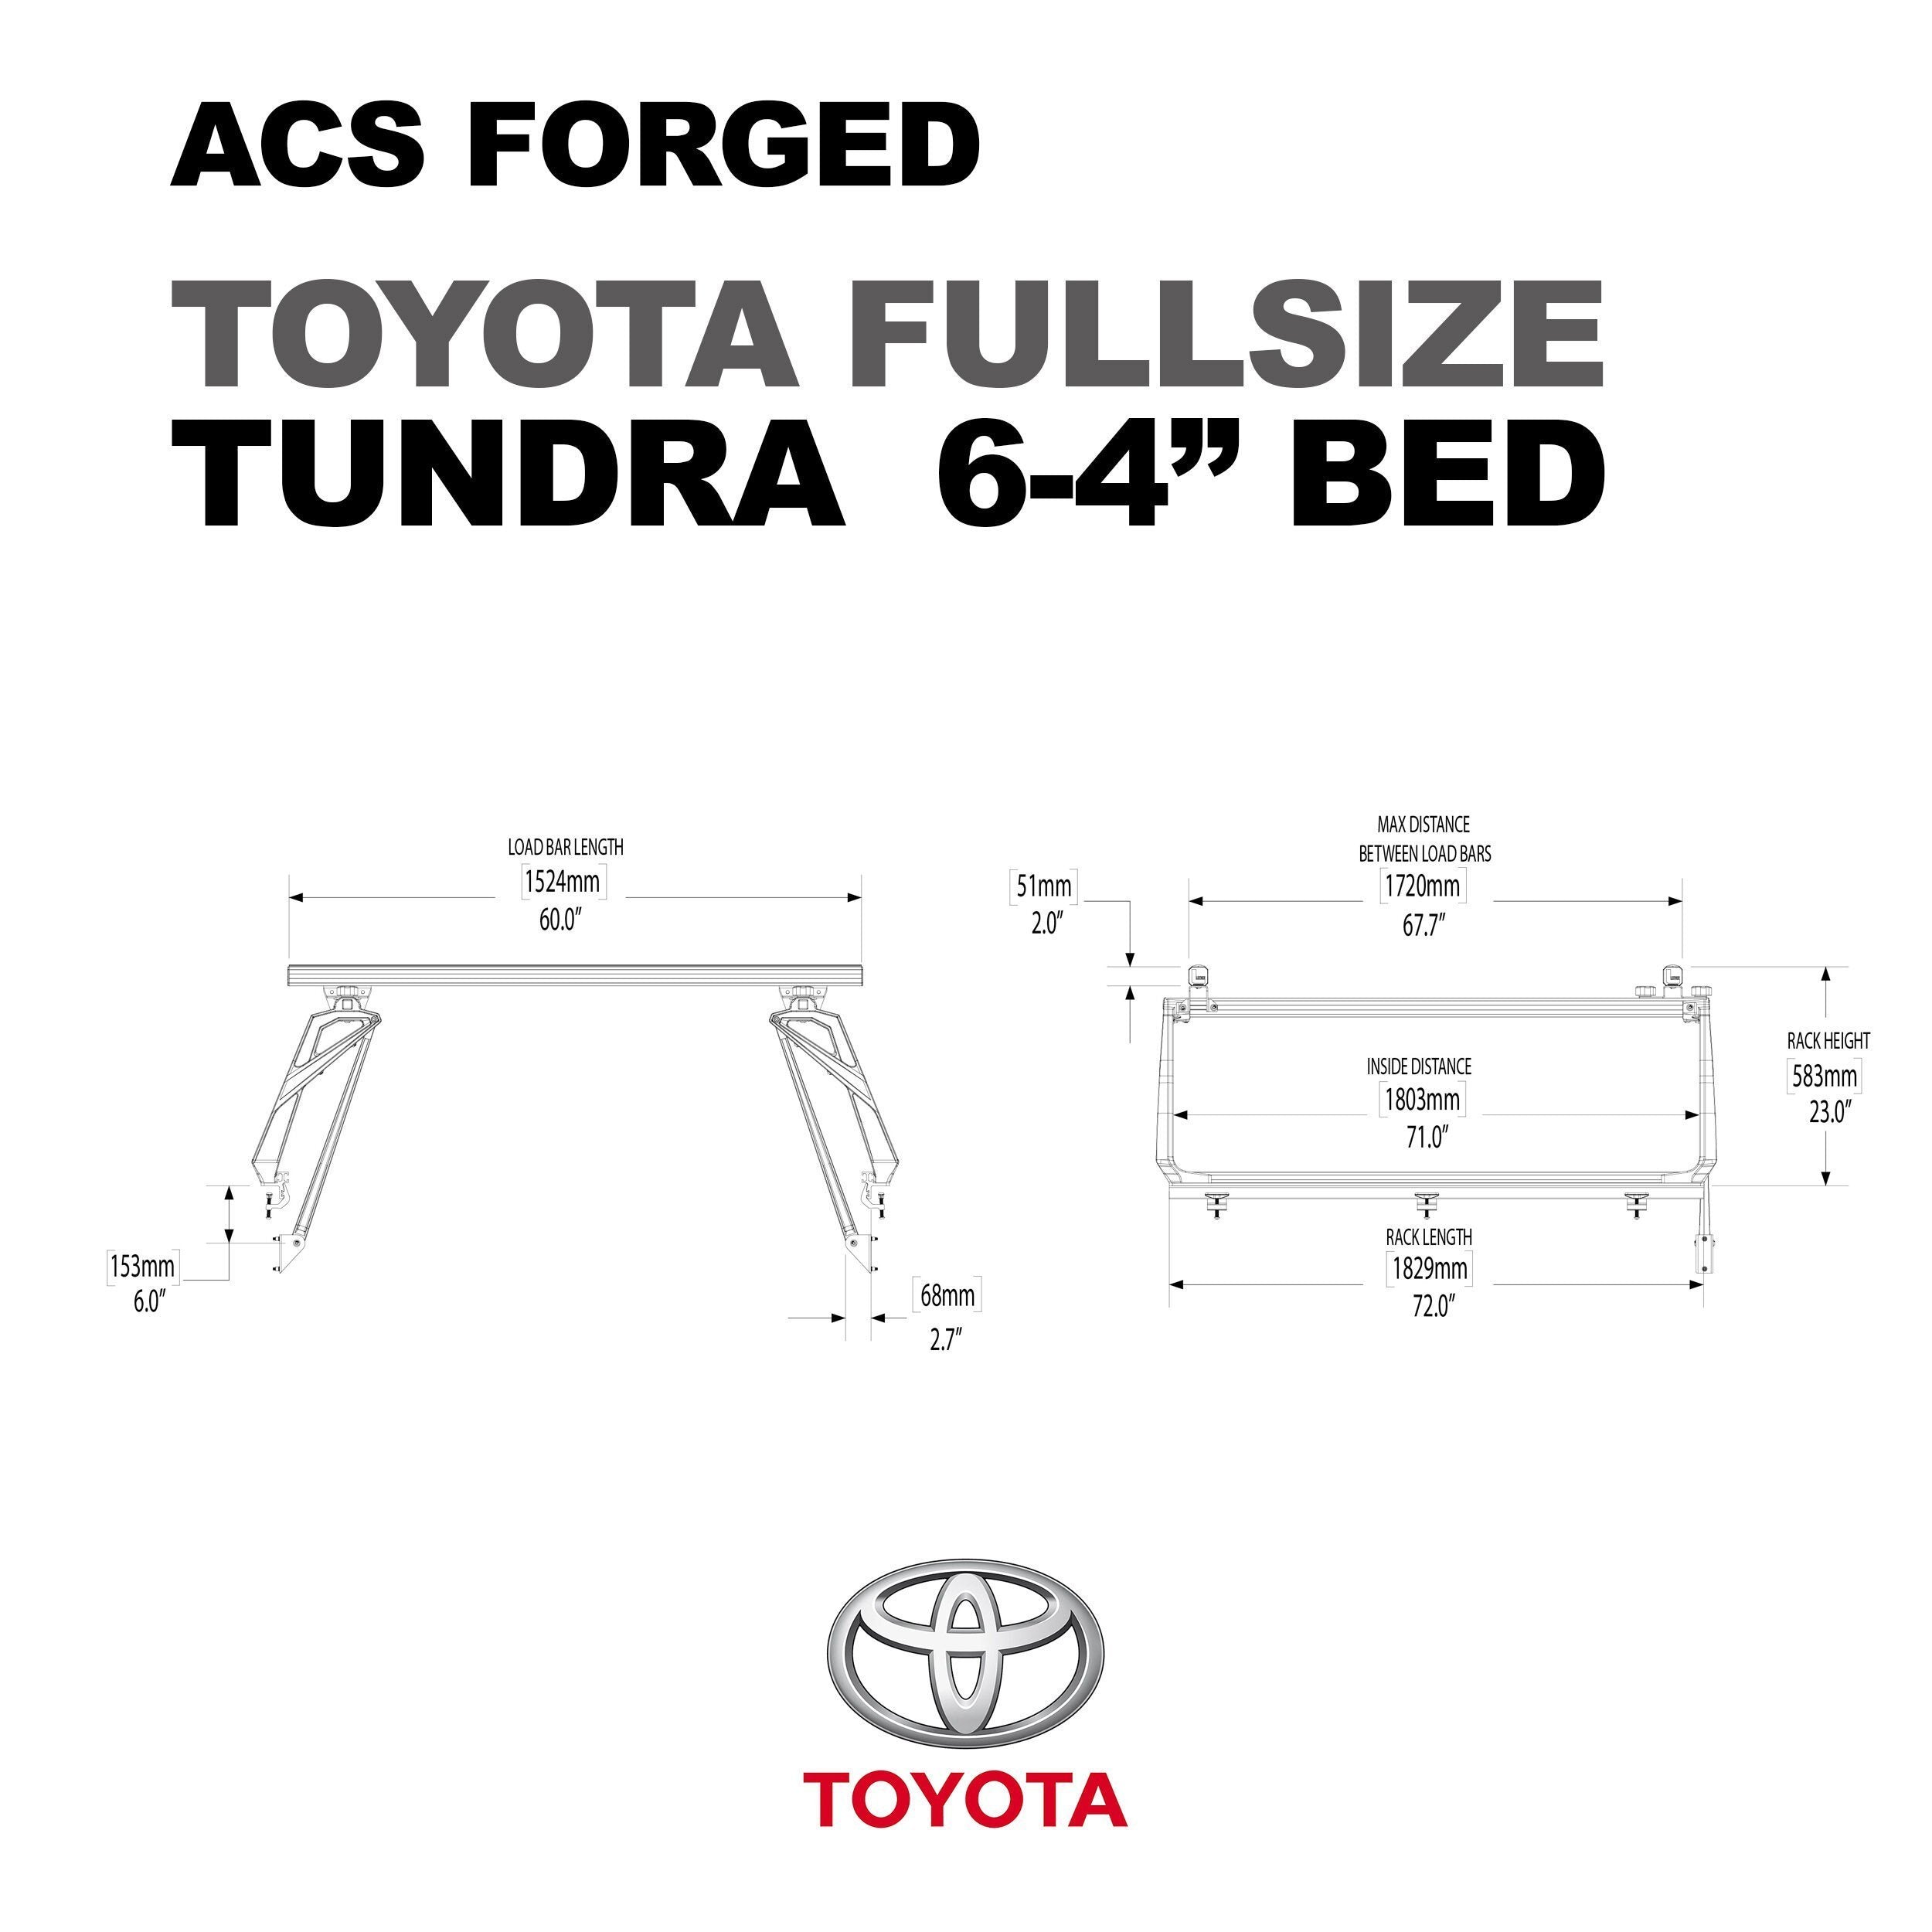 '01-06 Toyota Tundra-ACS Forged Bed Accessories Leitner Designs design